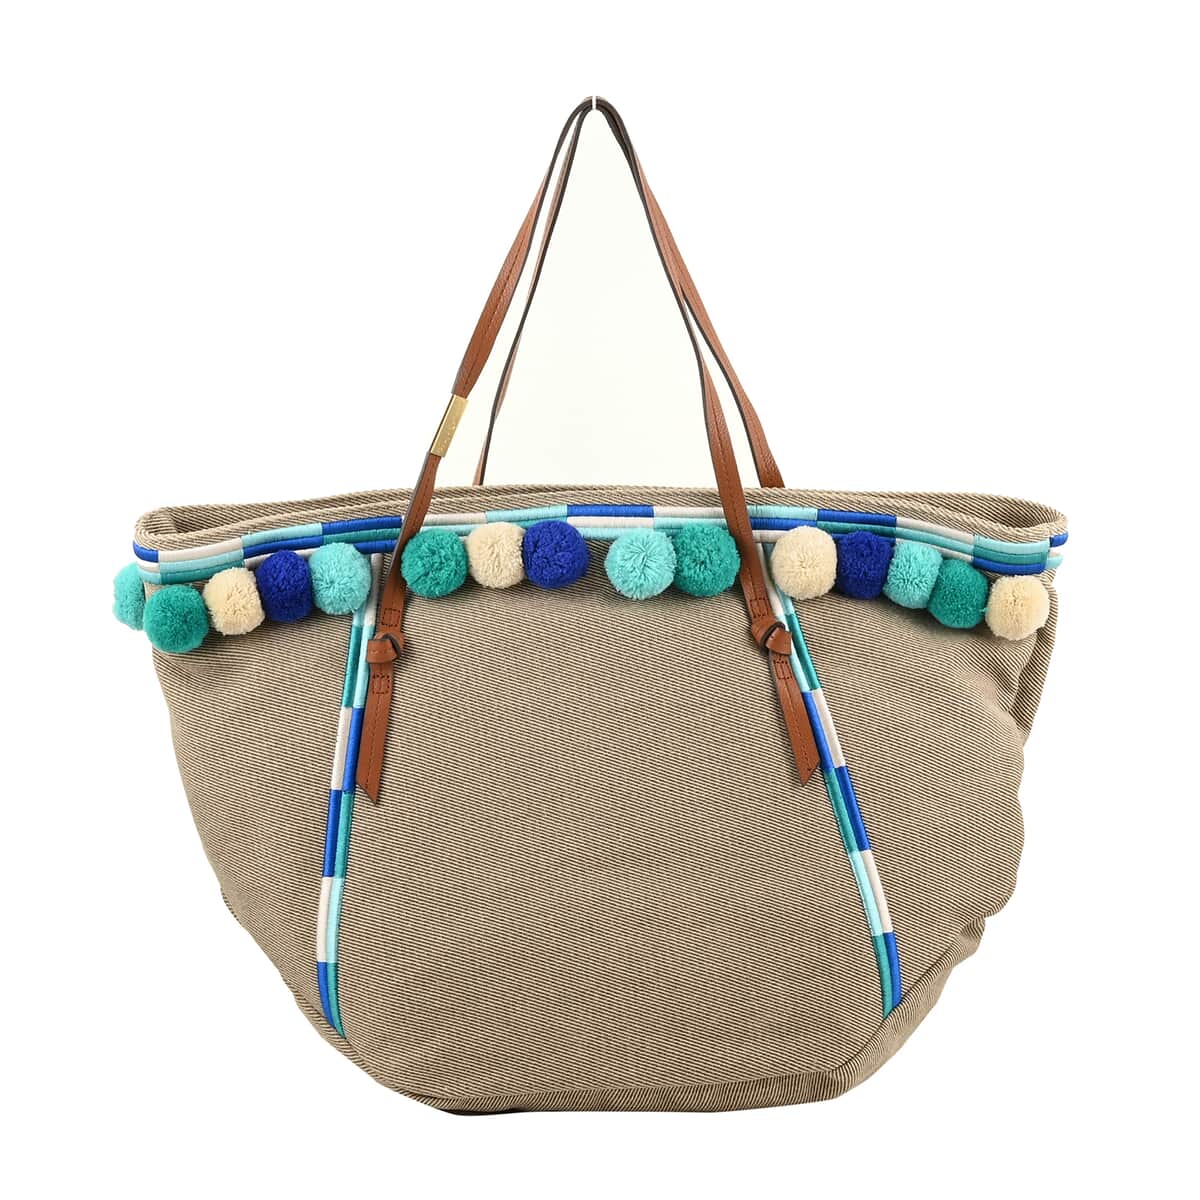 Foley & Corinna Blue Faux Leather Coconut Island Beach Tote Bag (21"x6.5"x13") image number 0